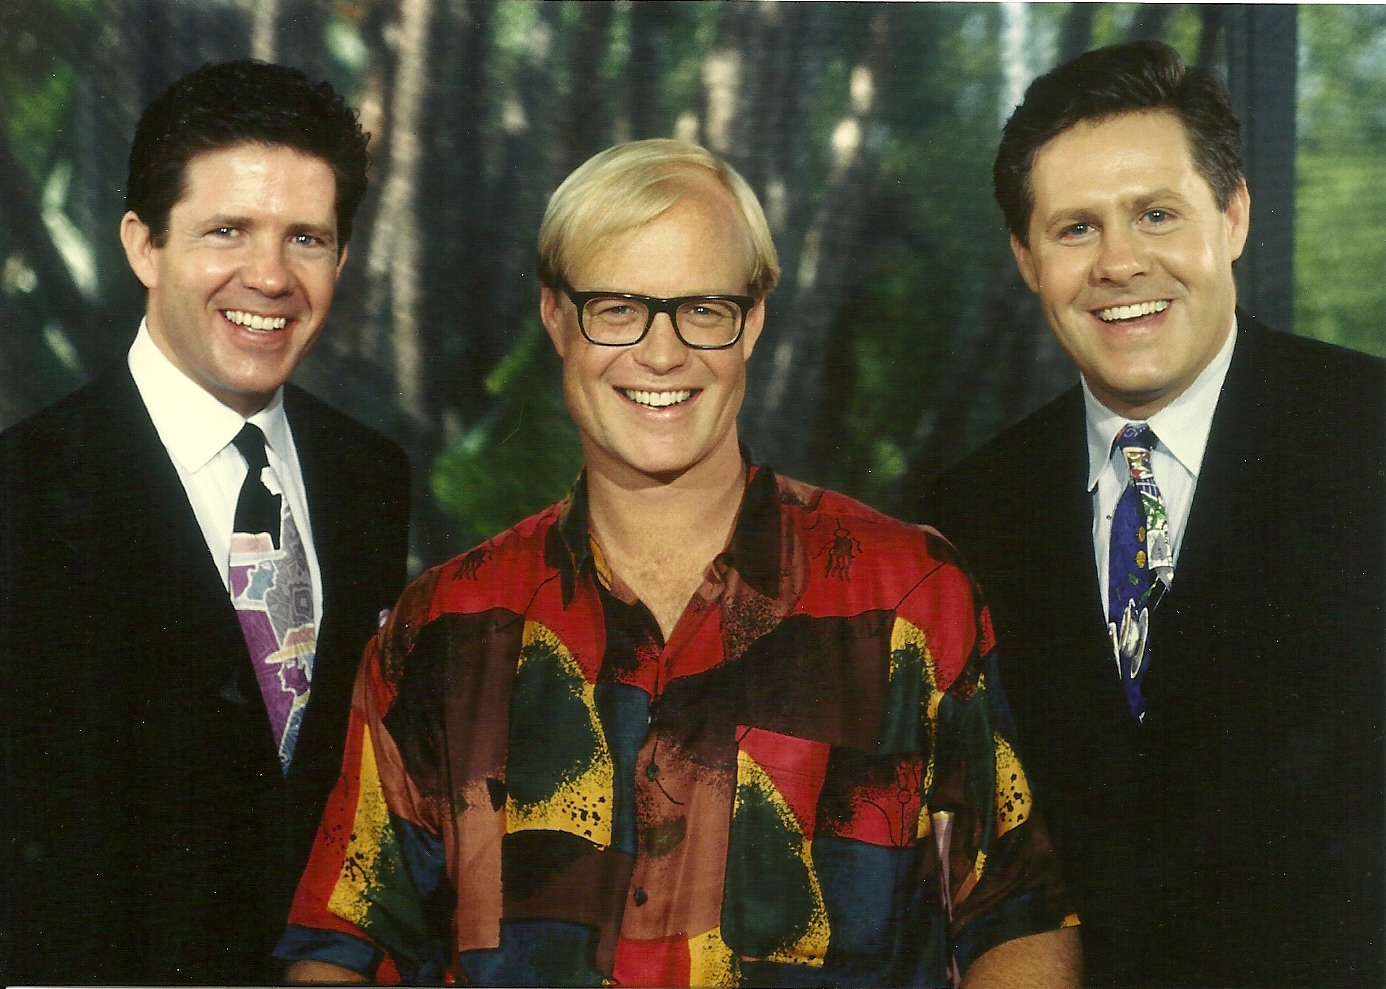 Bill Fagerbakke with the McCain Brothers after Good Morning Oklahoma interview.